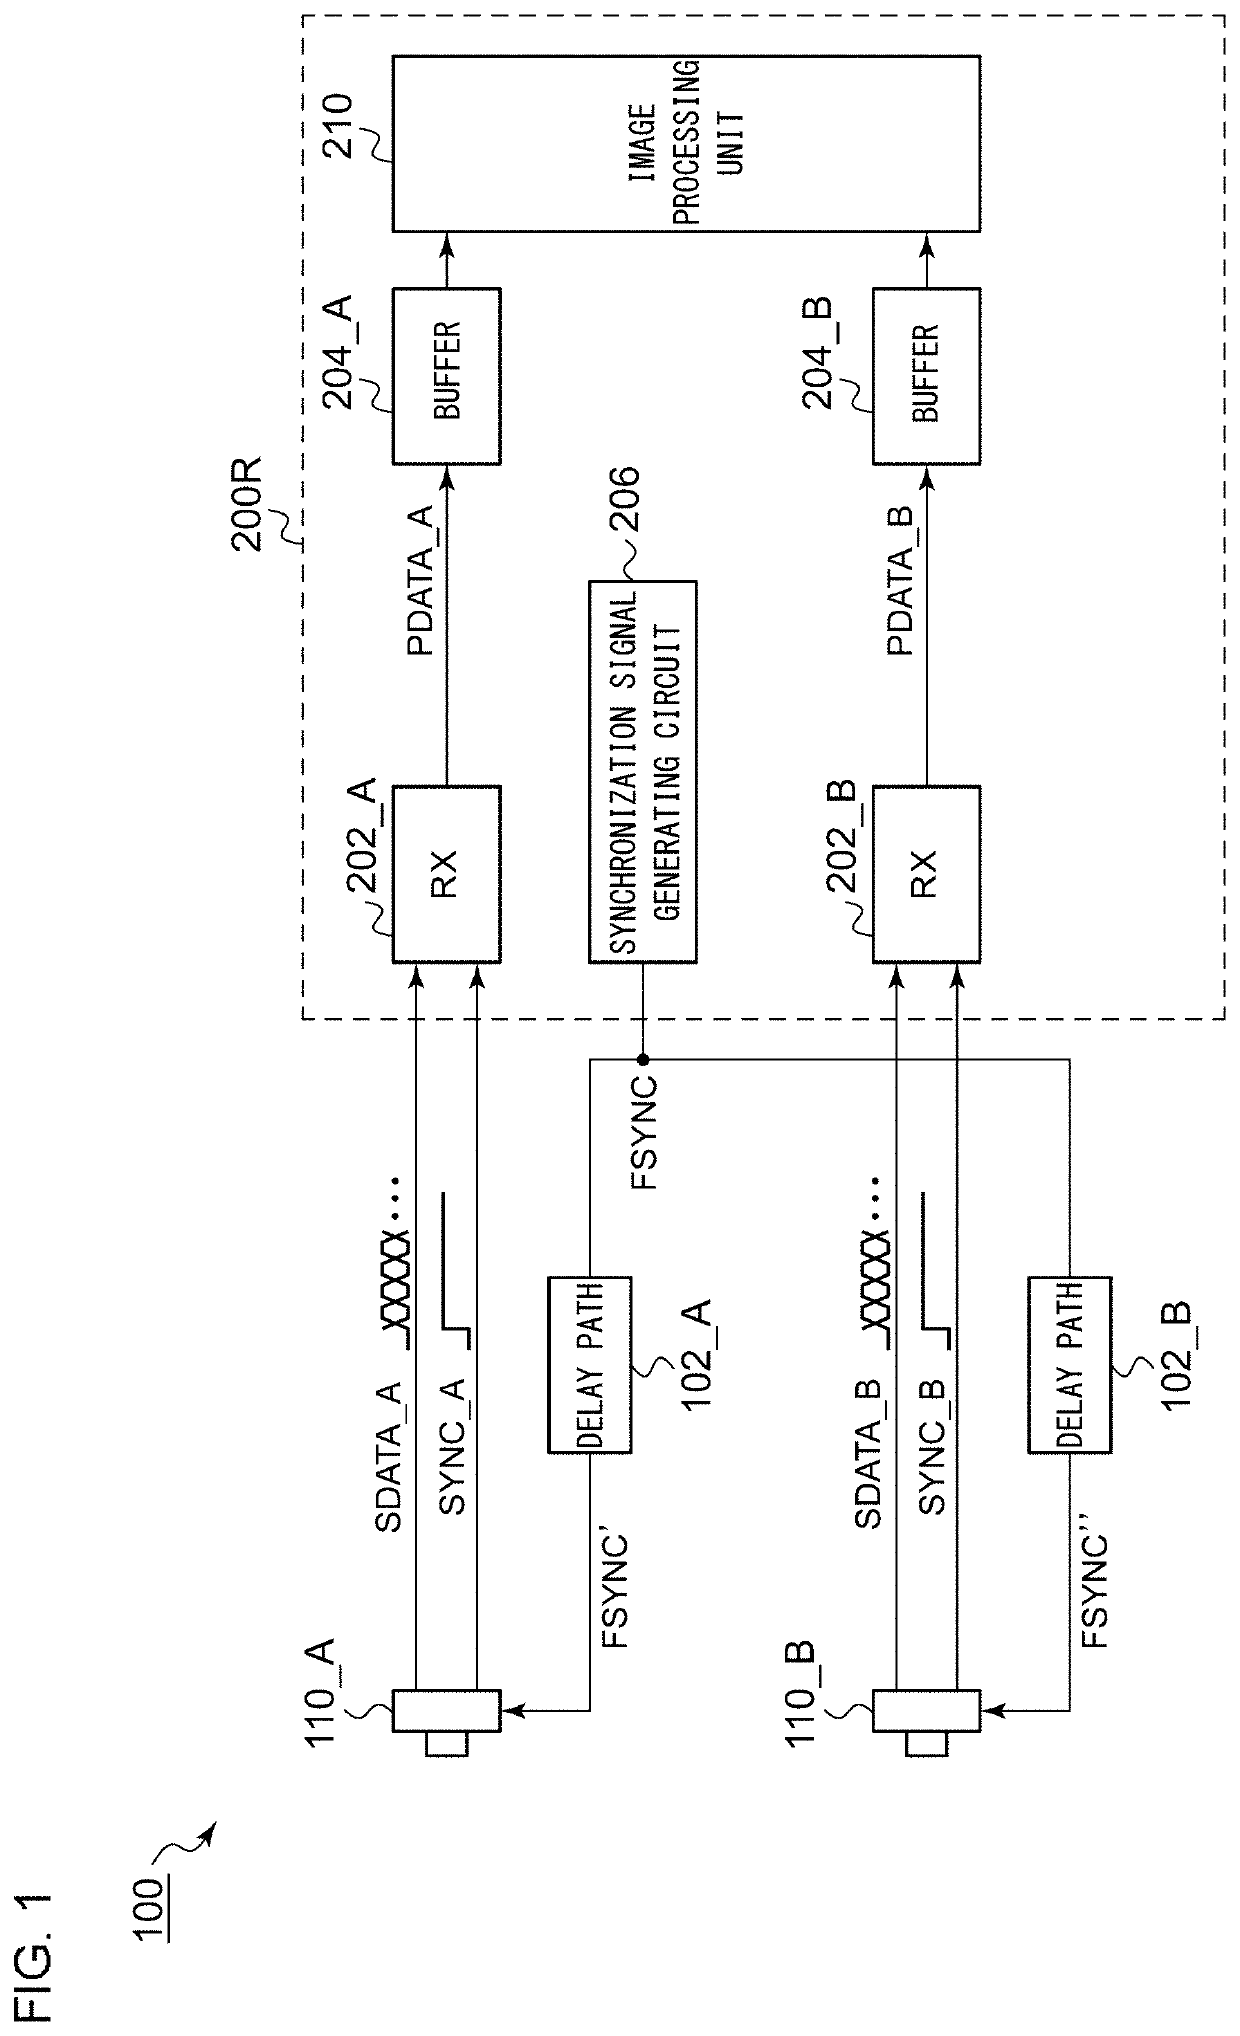 Camera system, controller thereof, automobile, and deserializer circuit